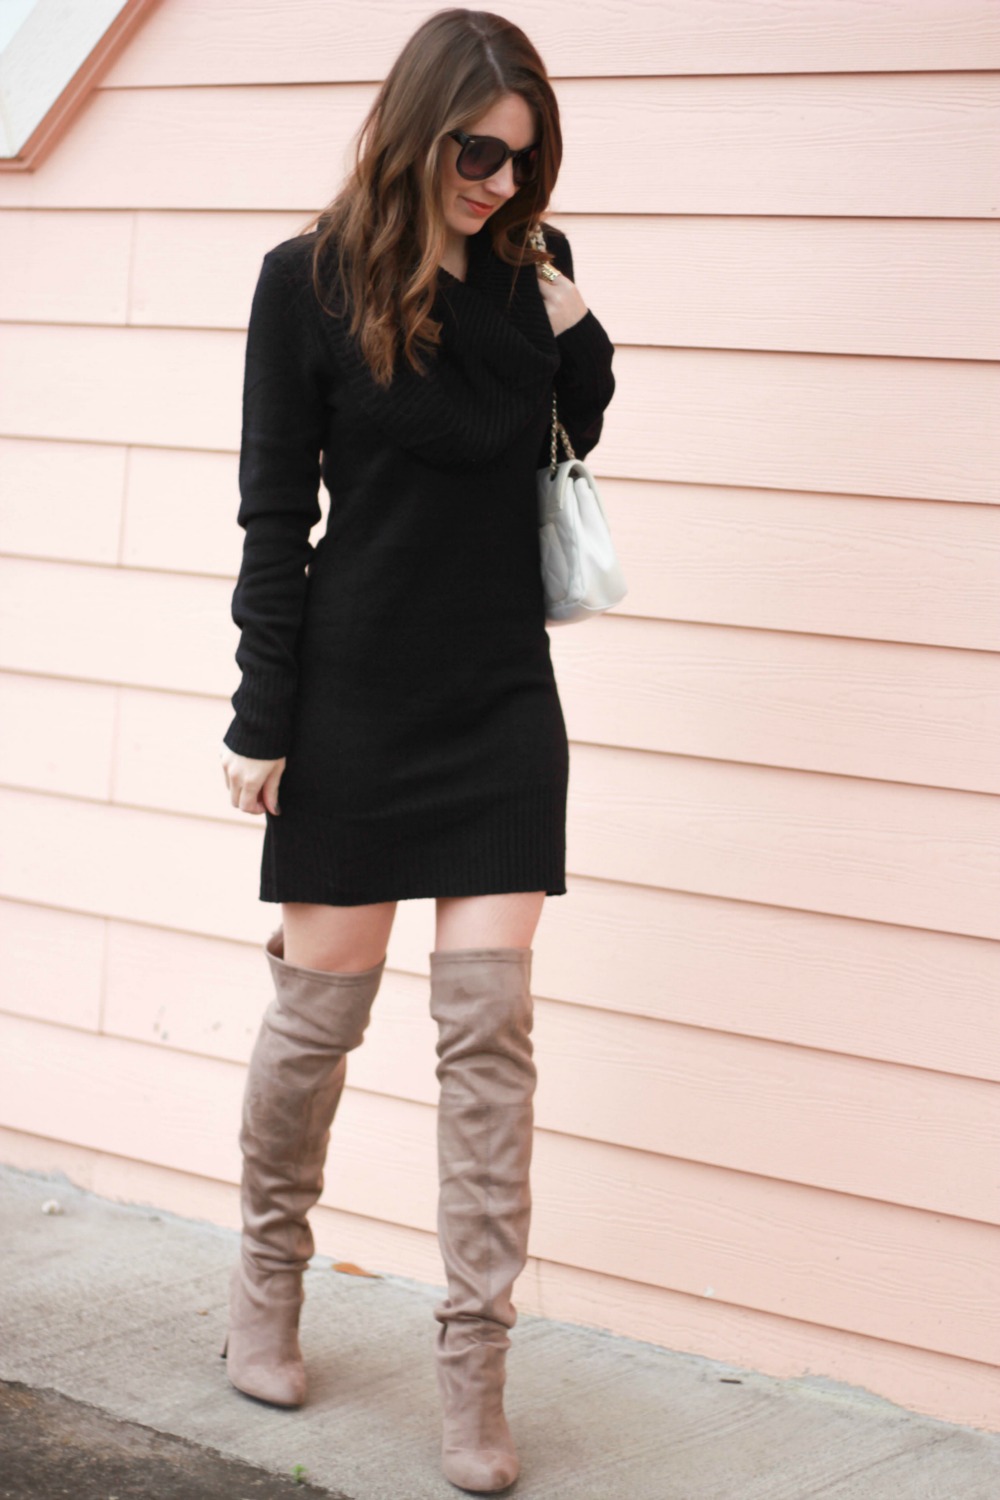 sweater dresses with knee high boots